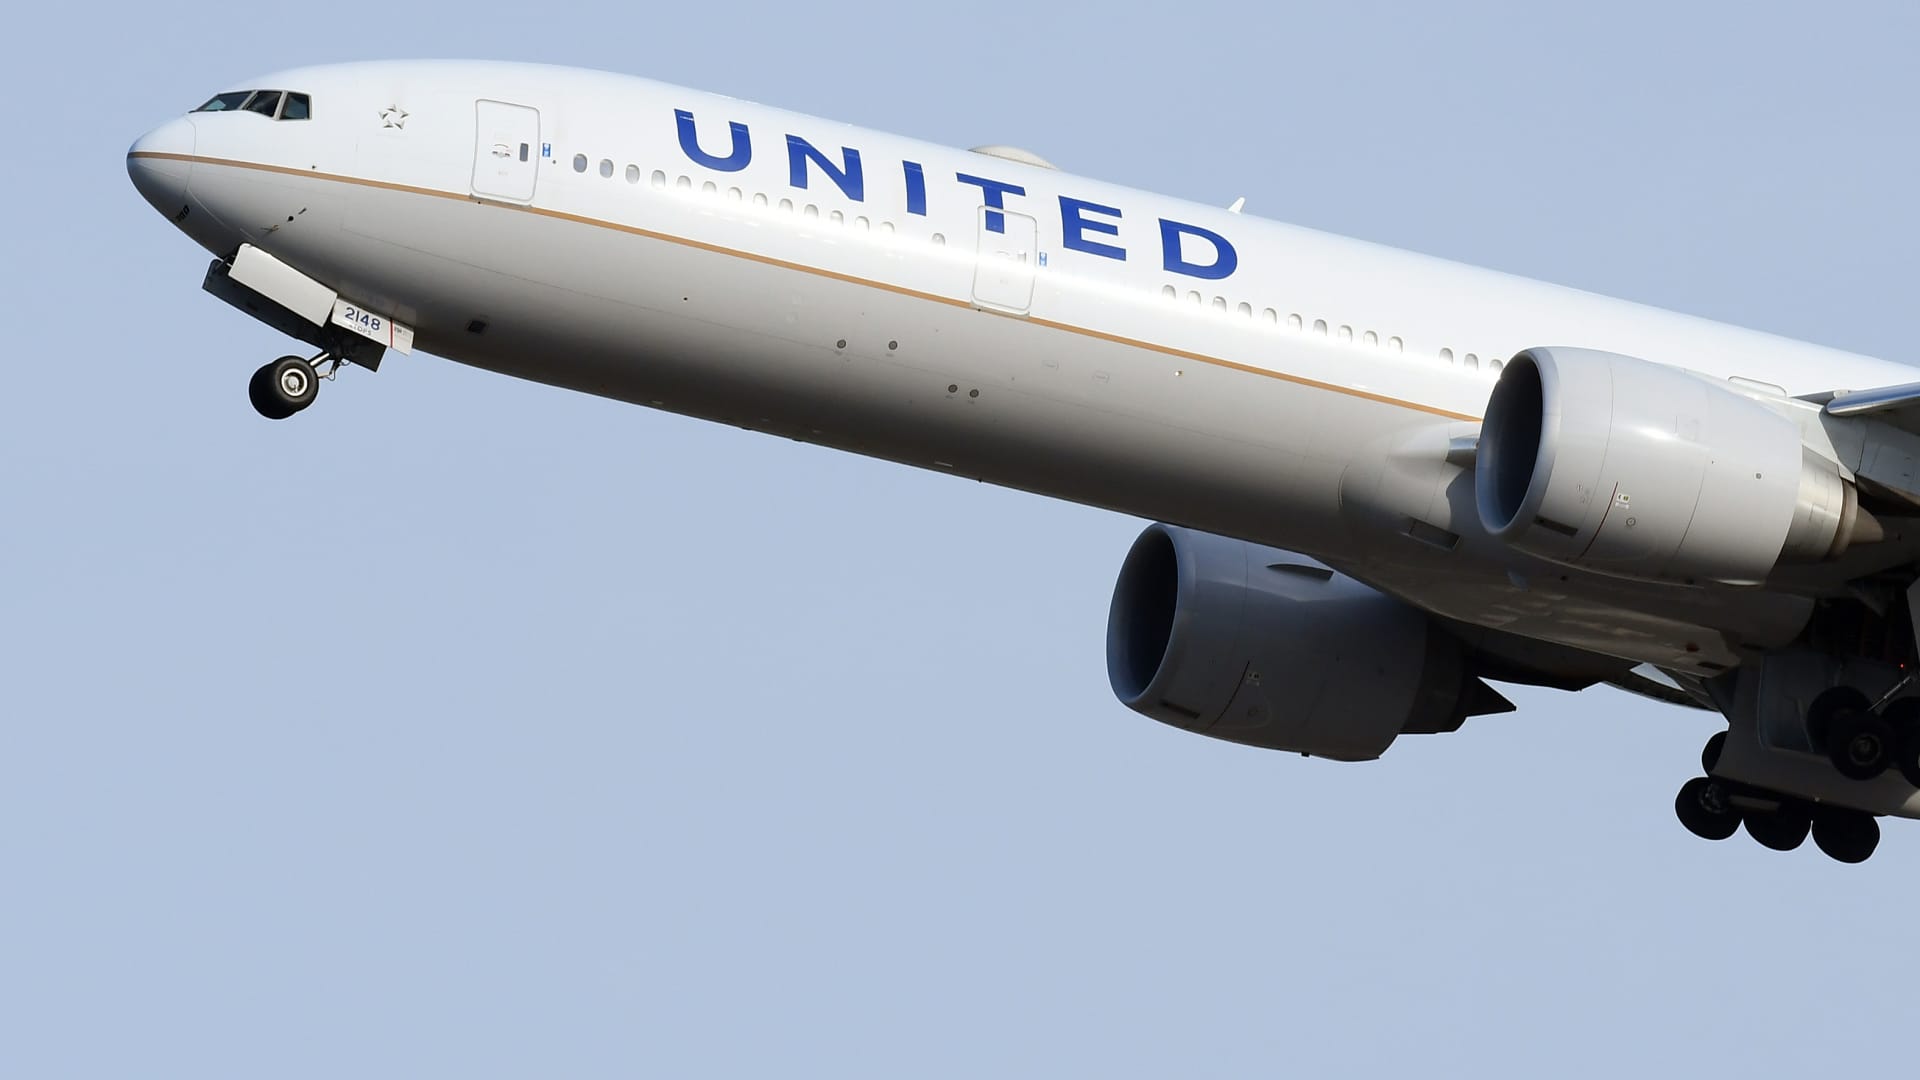 United adds new trans-Atlantic flights for summer 2023 in bet on travel recovery